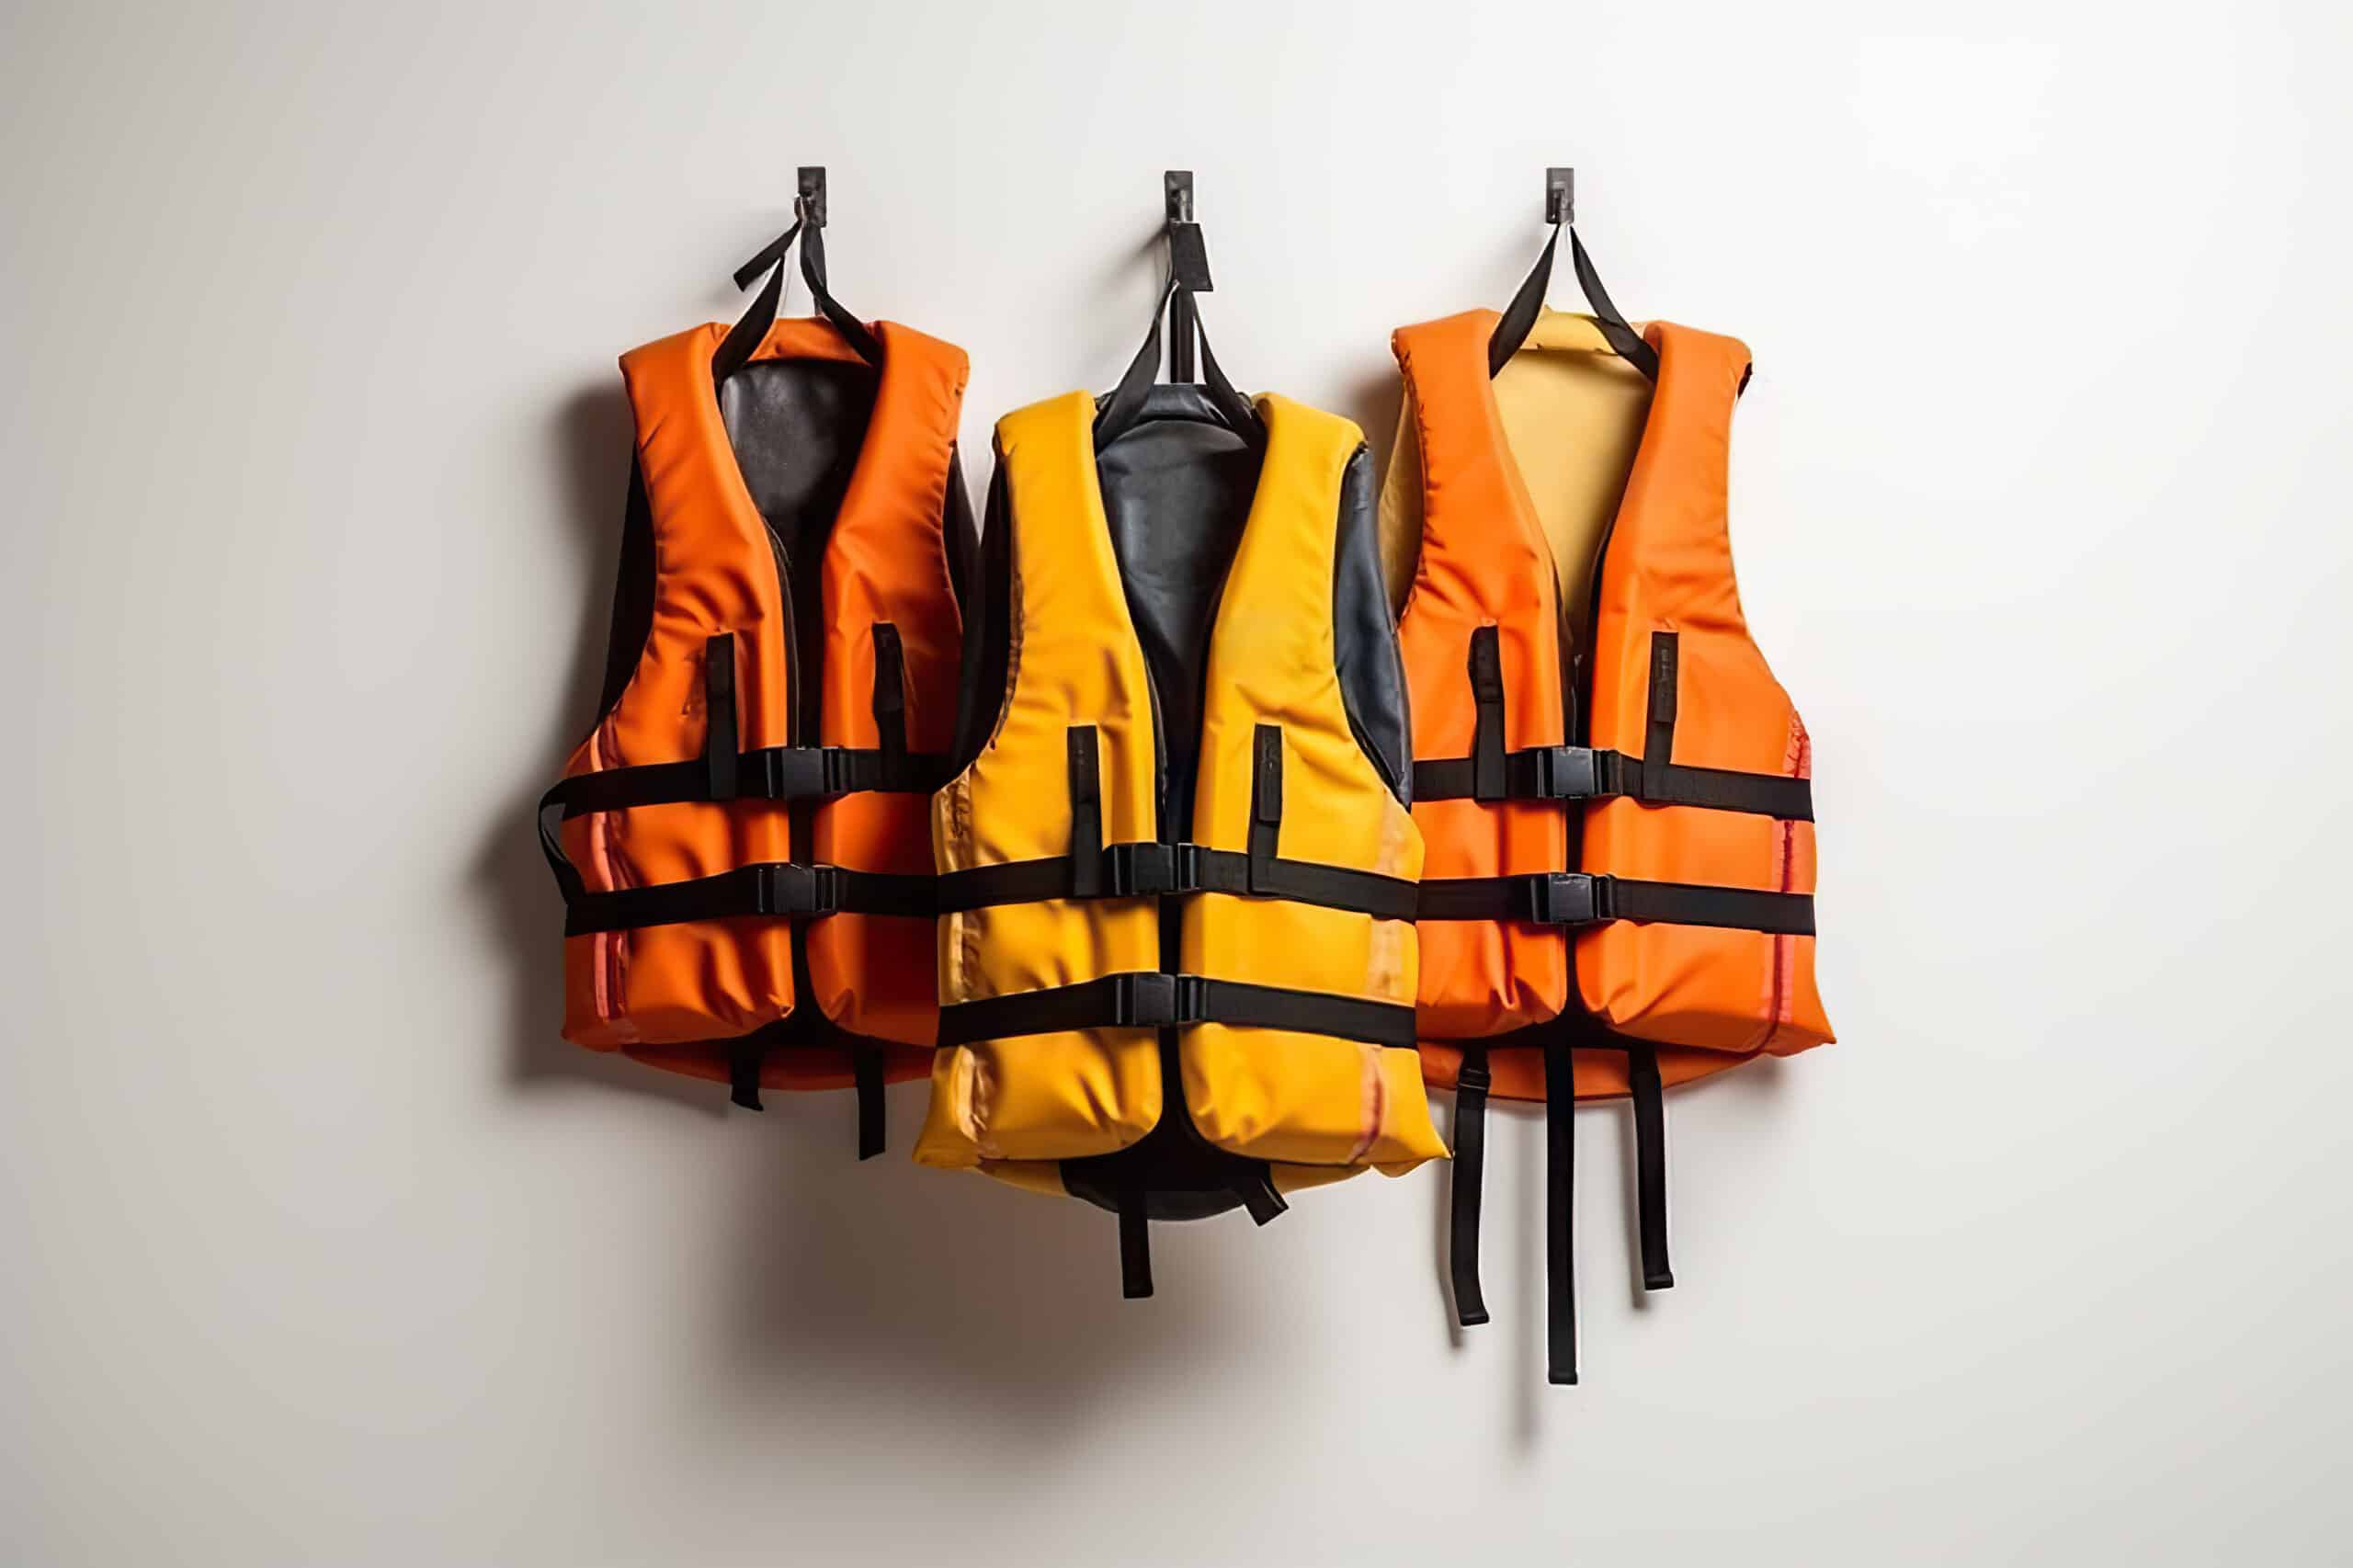 fanatic4fishing.com : How much is a ticket for no life jacket in Texas?